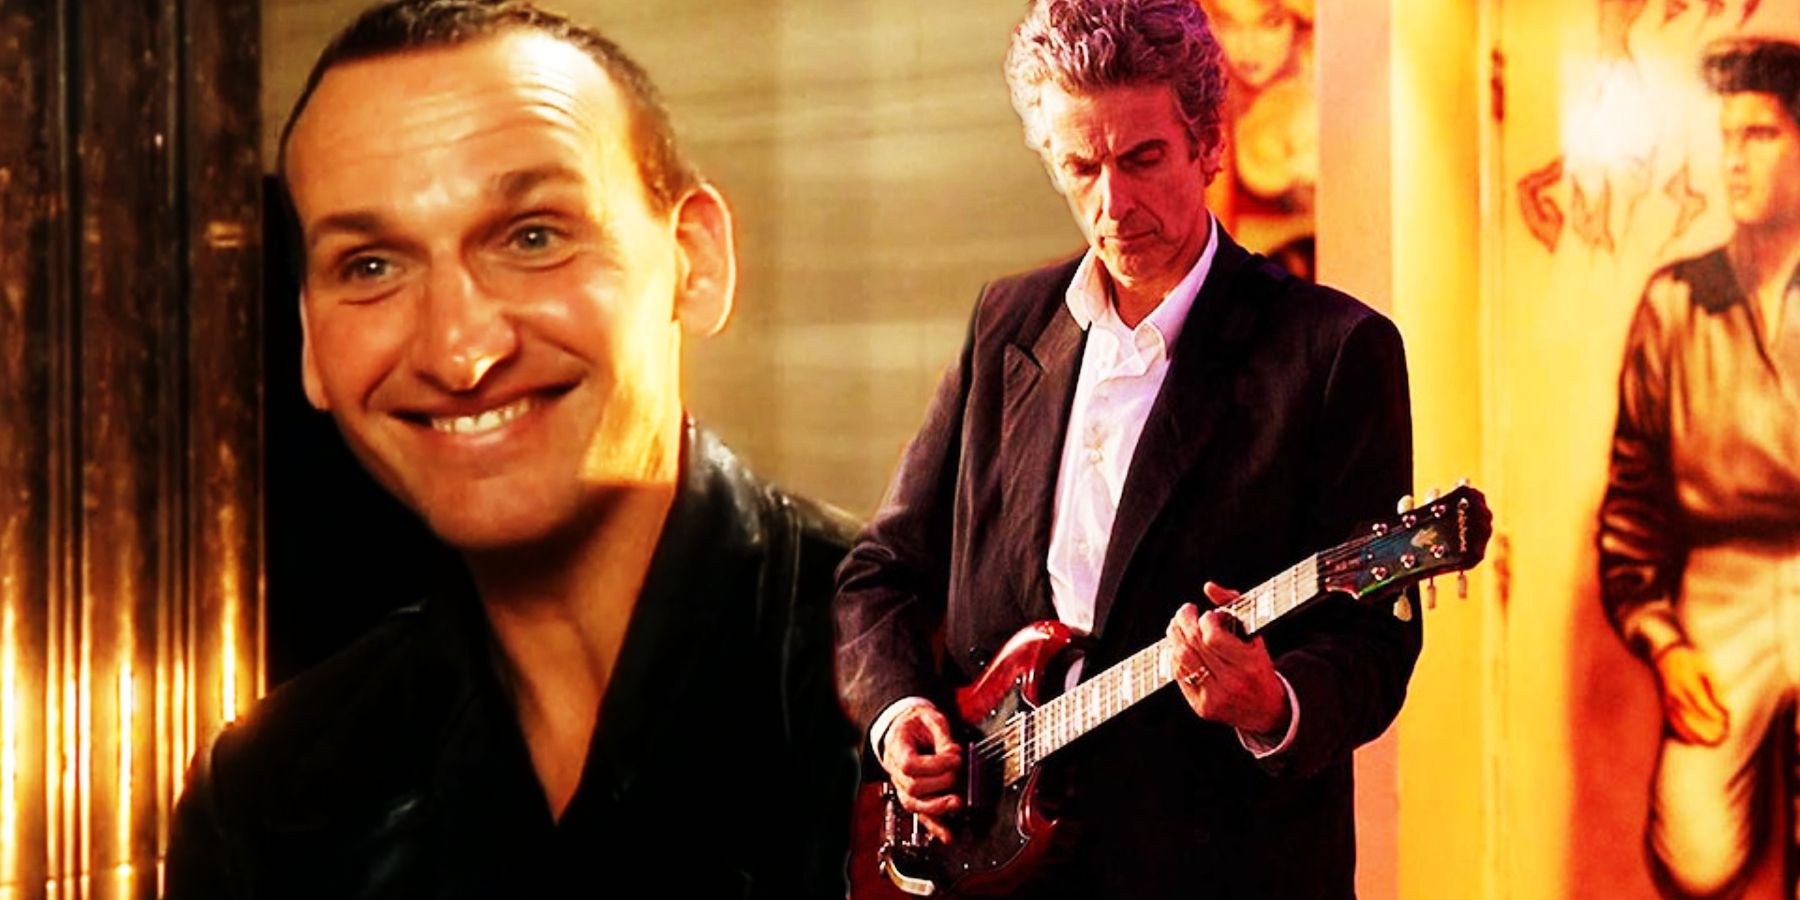 The Ninth Doctor enjoys some music, while the Twelfth Doctor plays guitar in Doctor Who